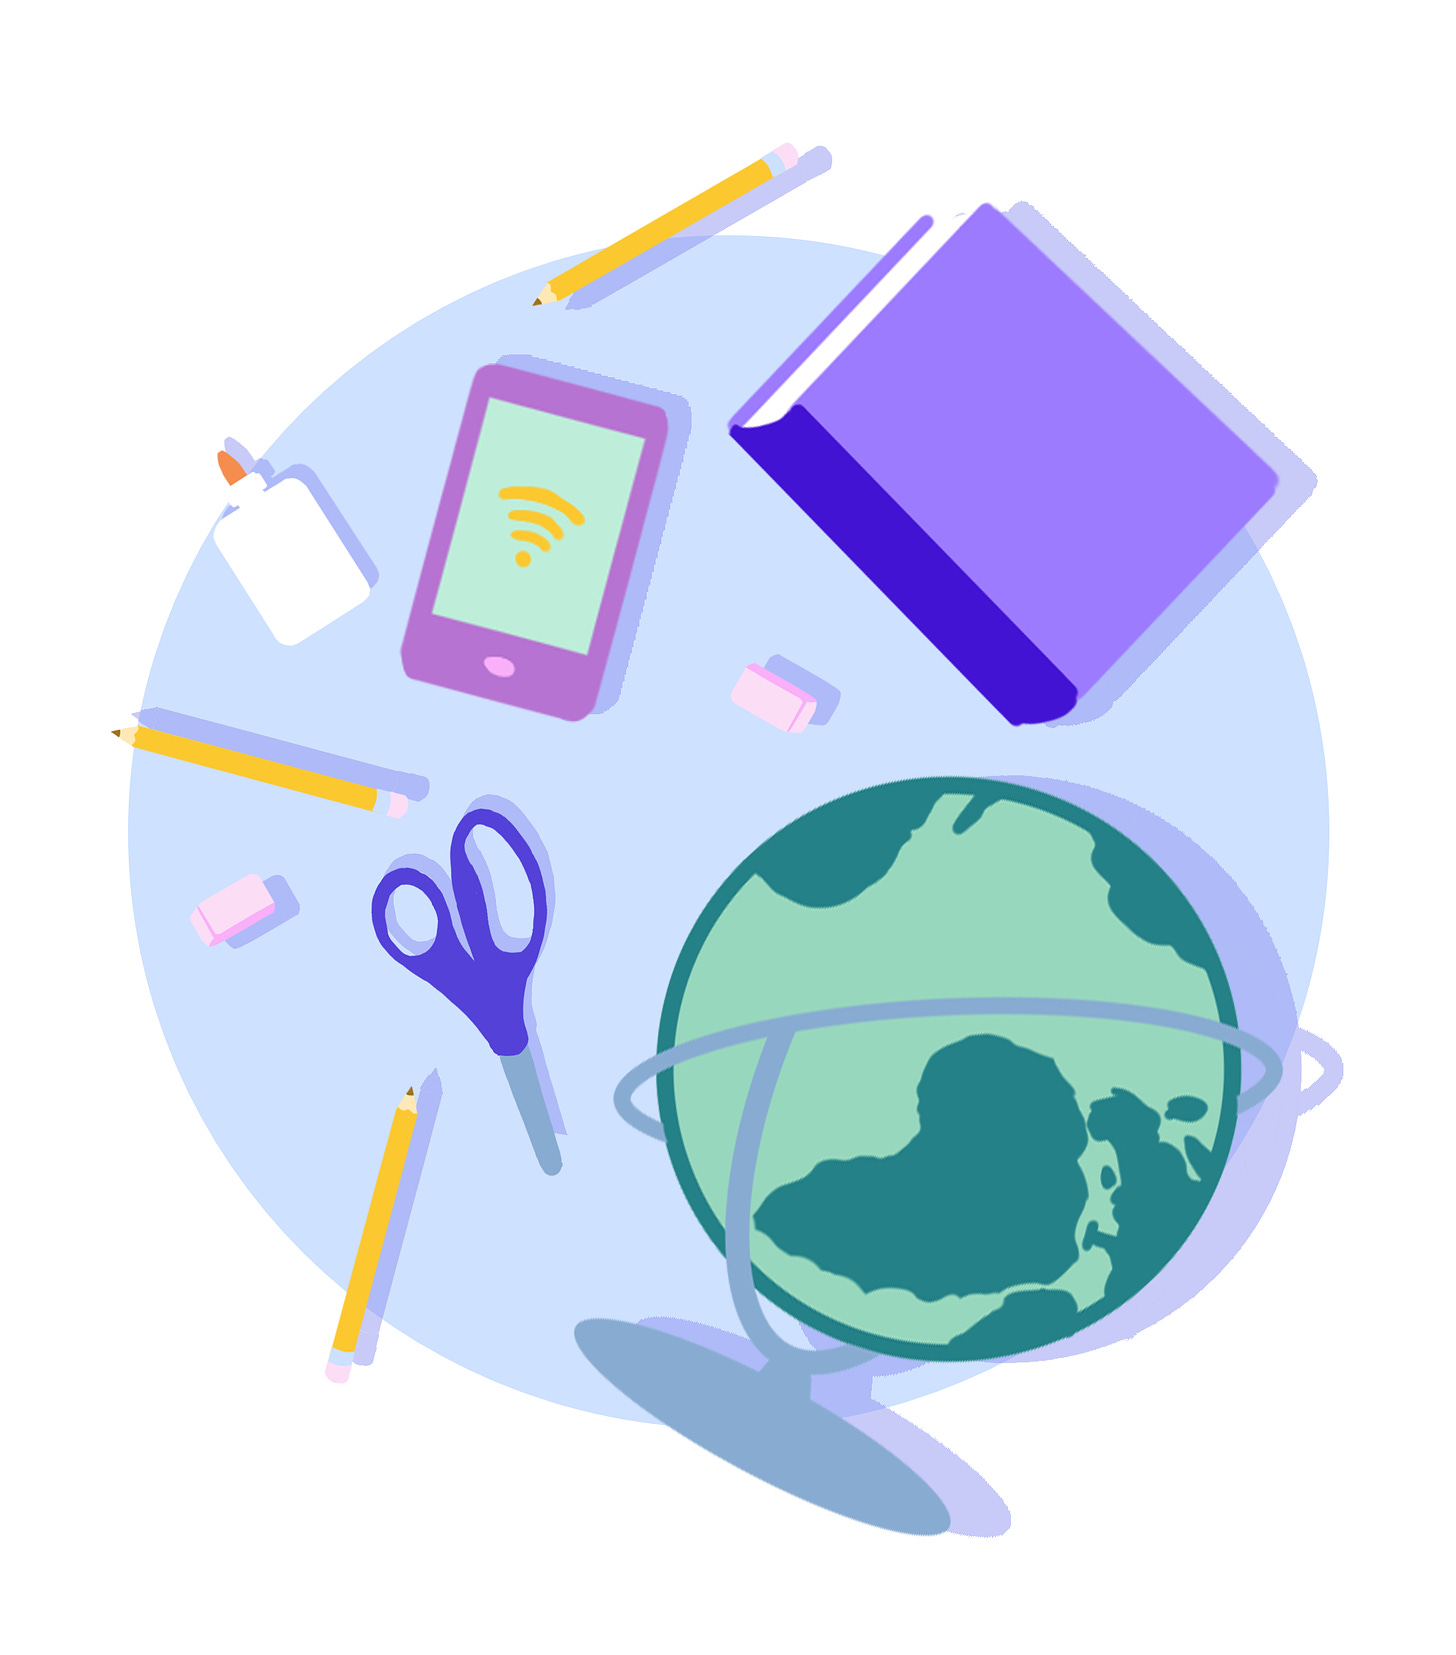 An illustration of objects associated with education: a globe, a book, pencils, erasers, paste, a cellphone, scissors